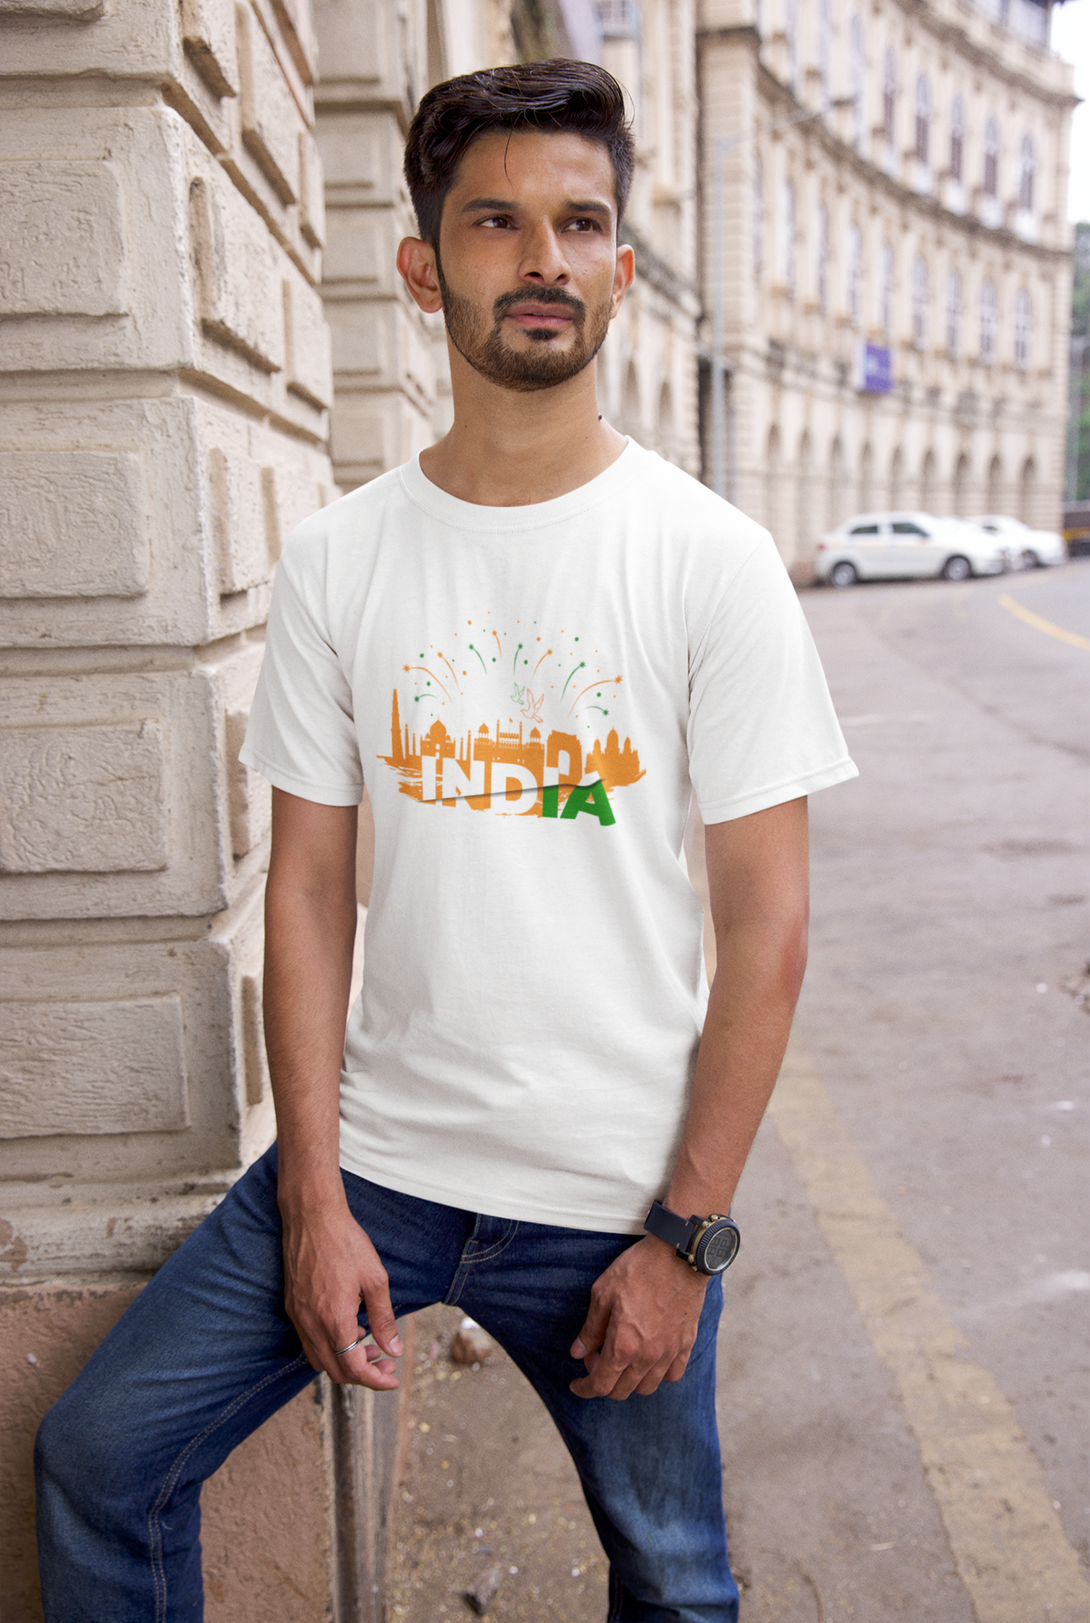 India Monument Tribute White Printed T-Shirt For Men - WowWaves - 3